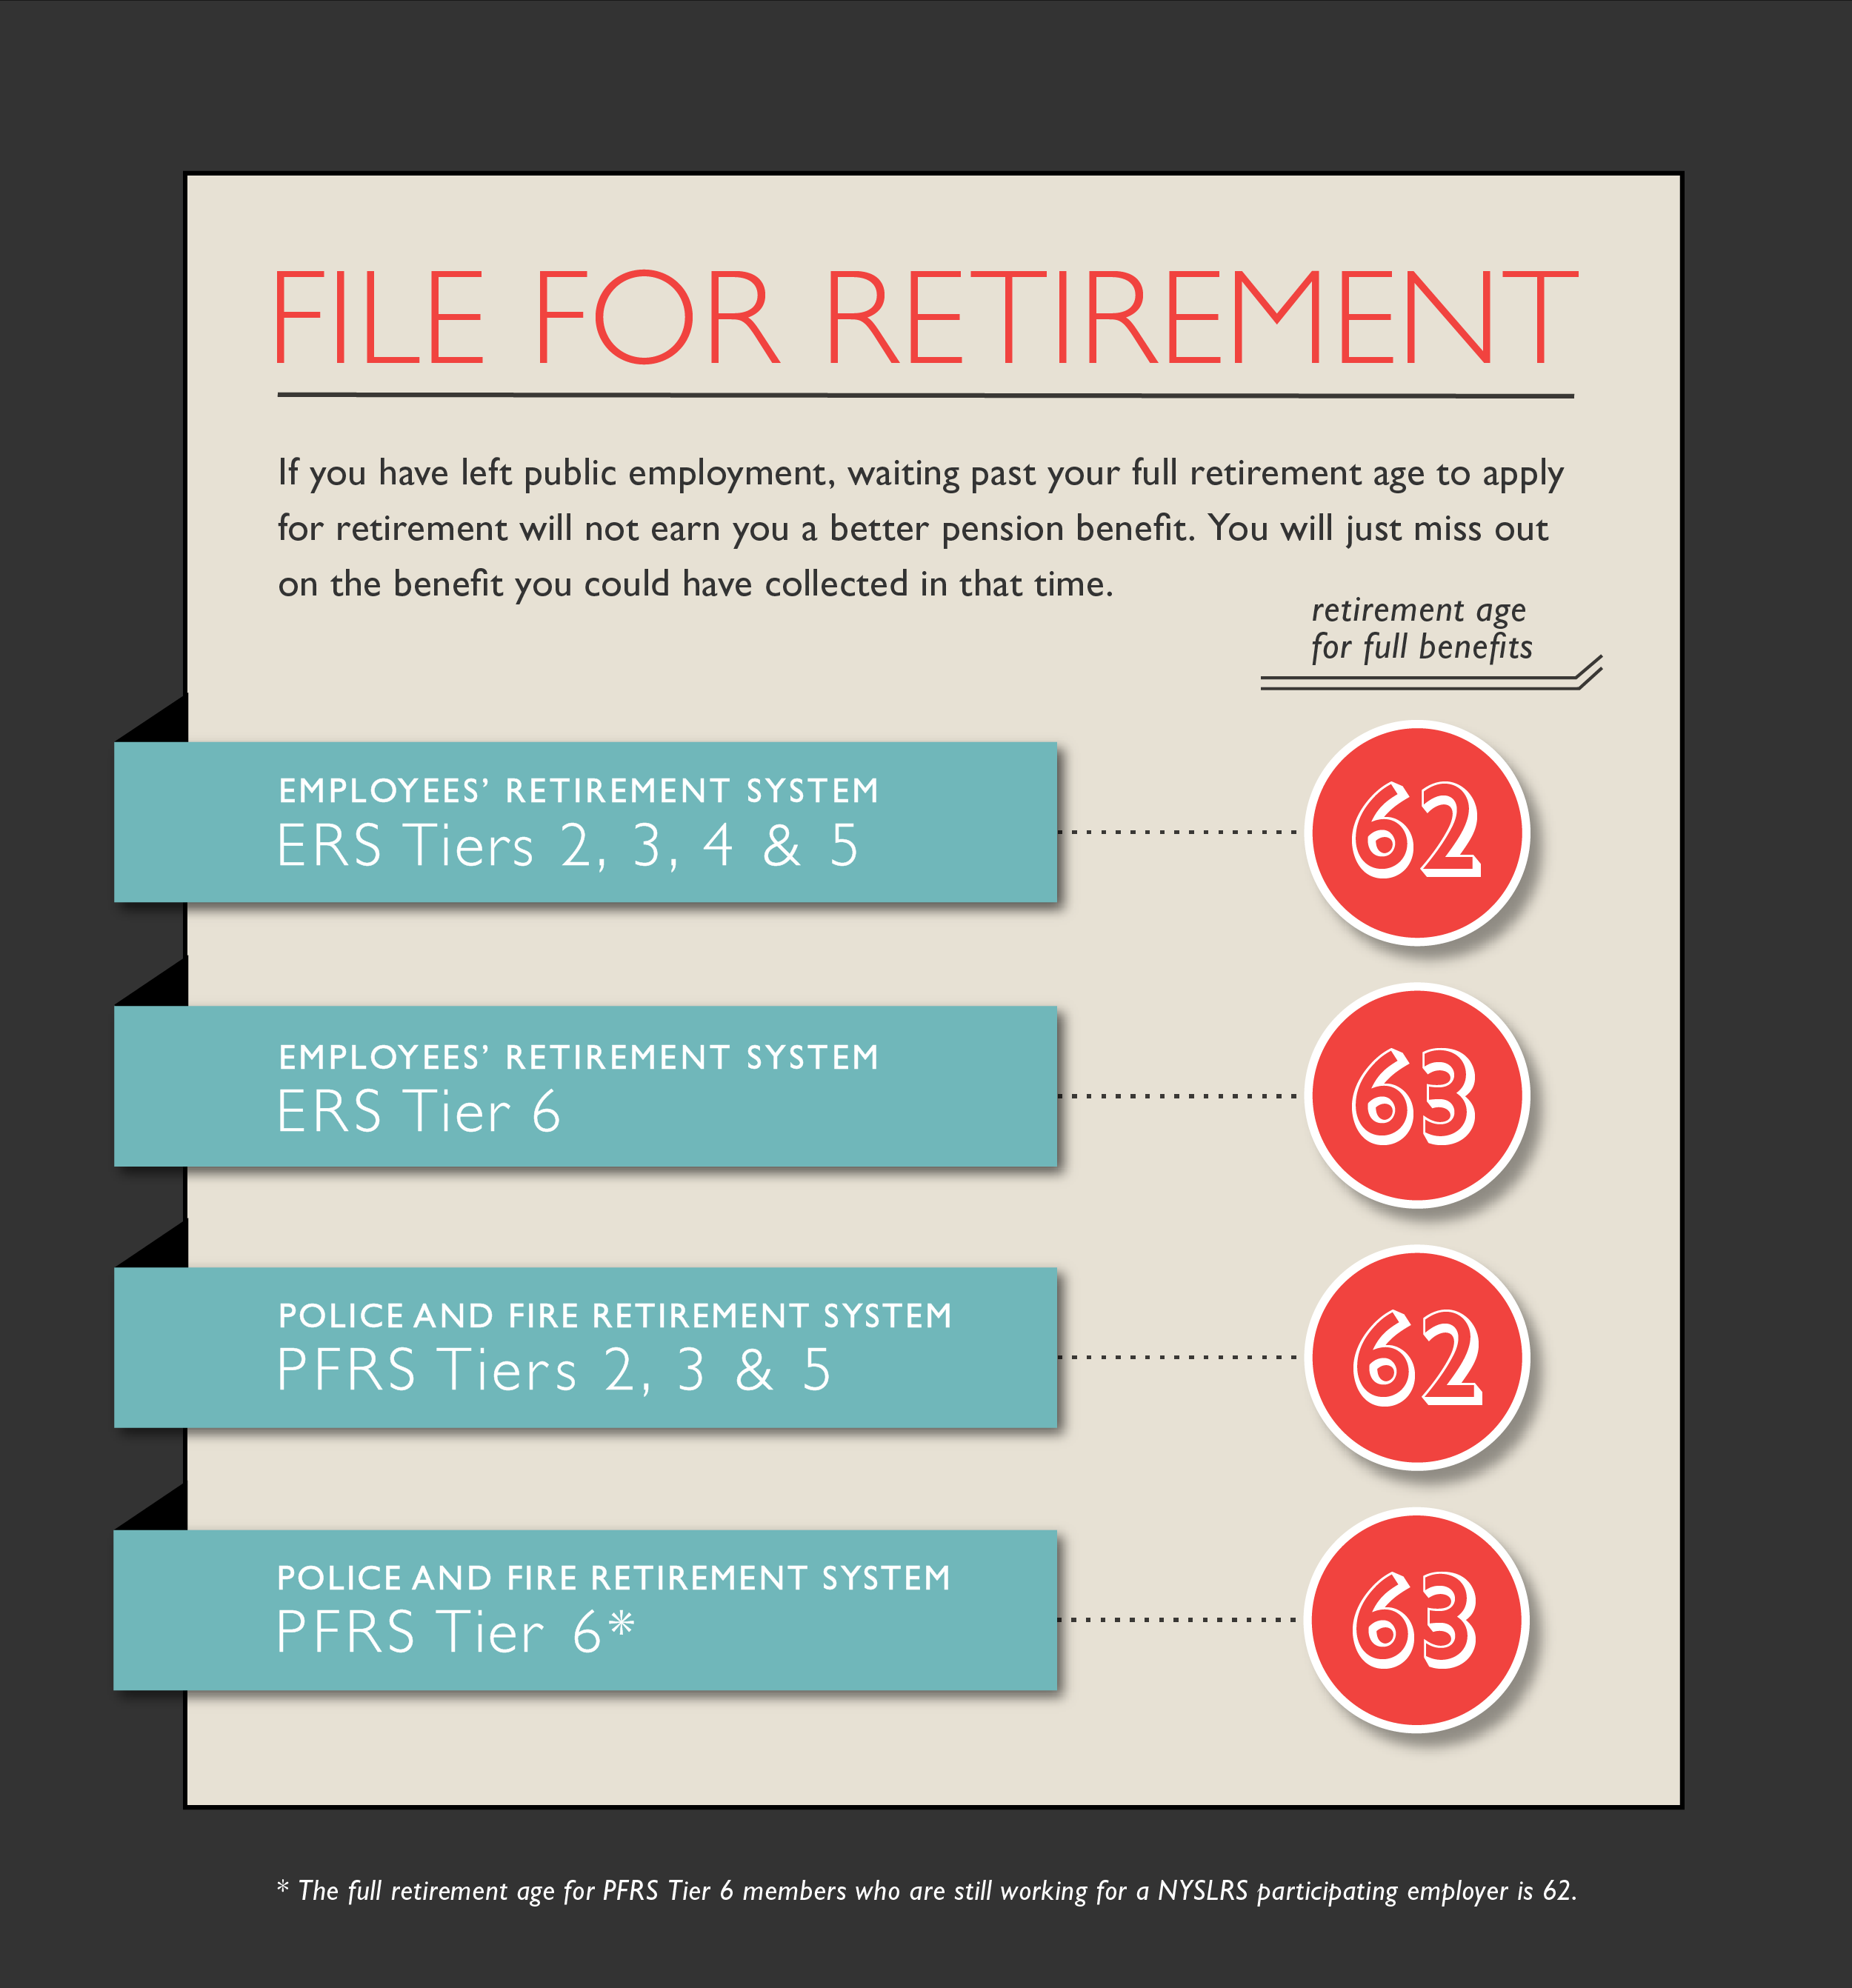 retirement age for full benefits if you left public employment